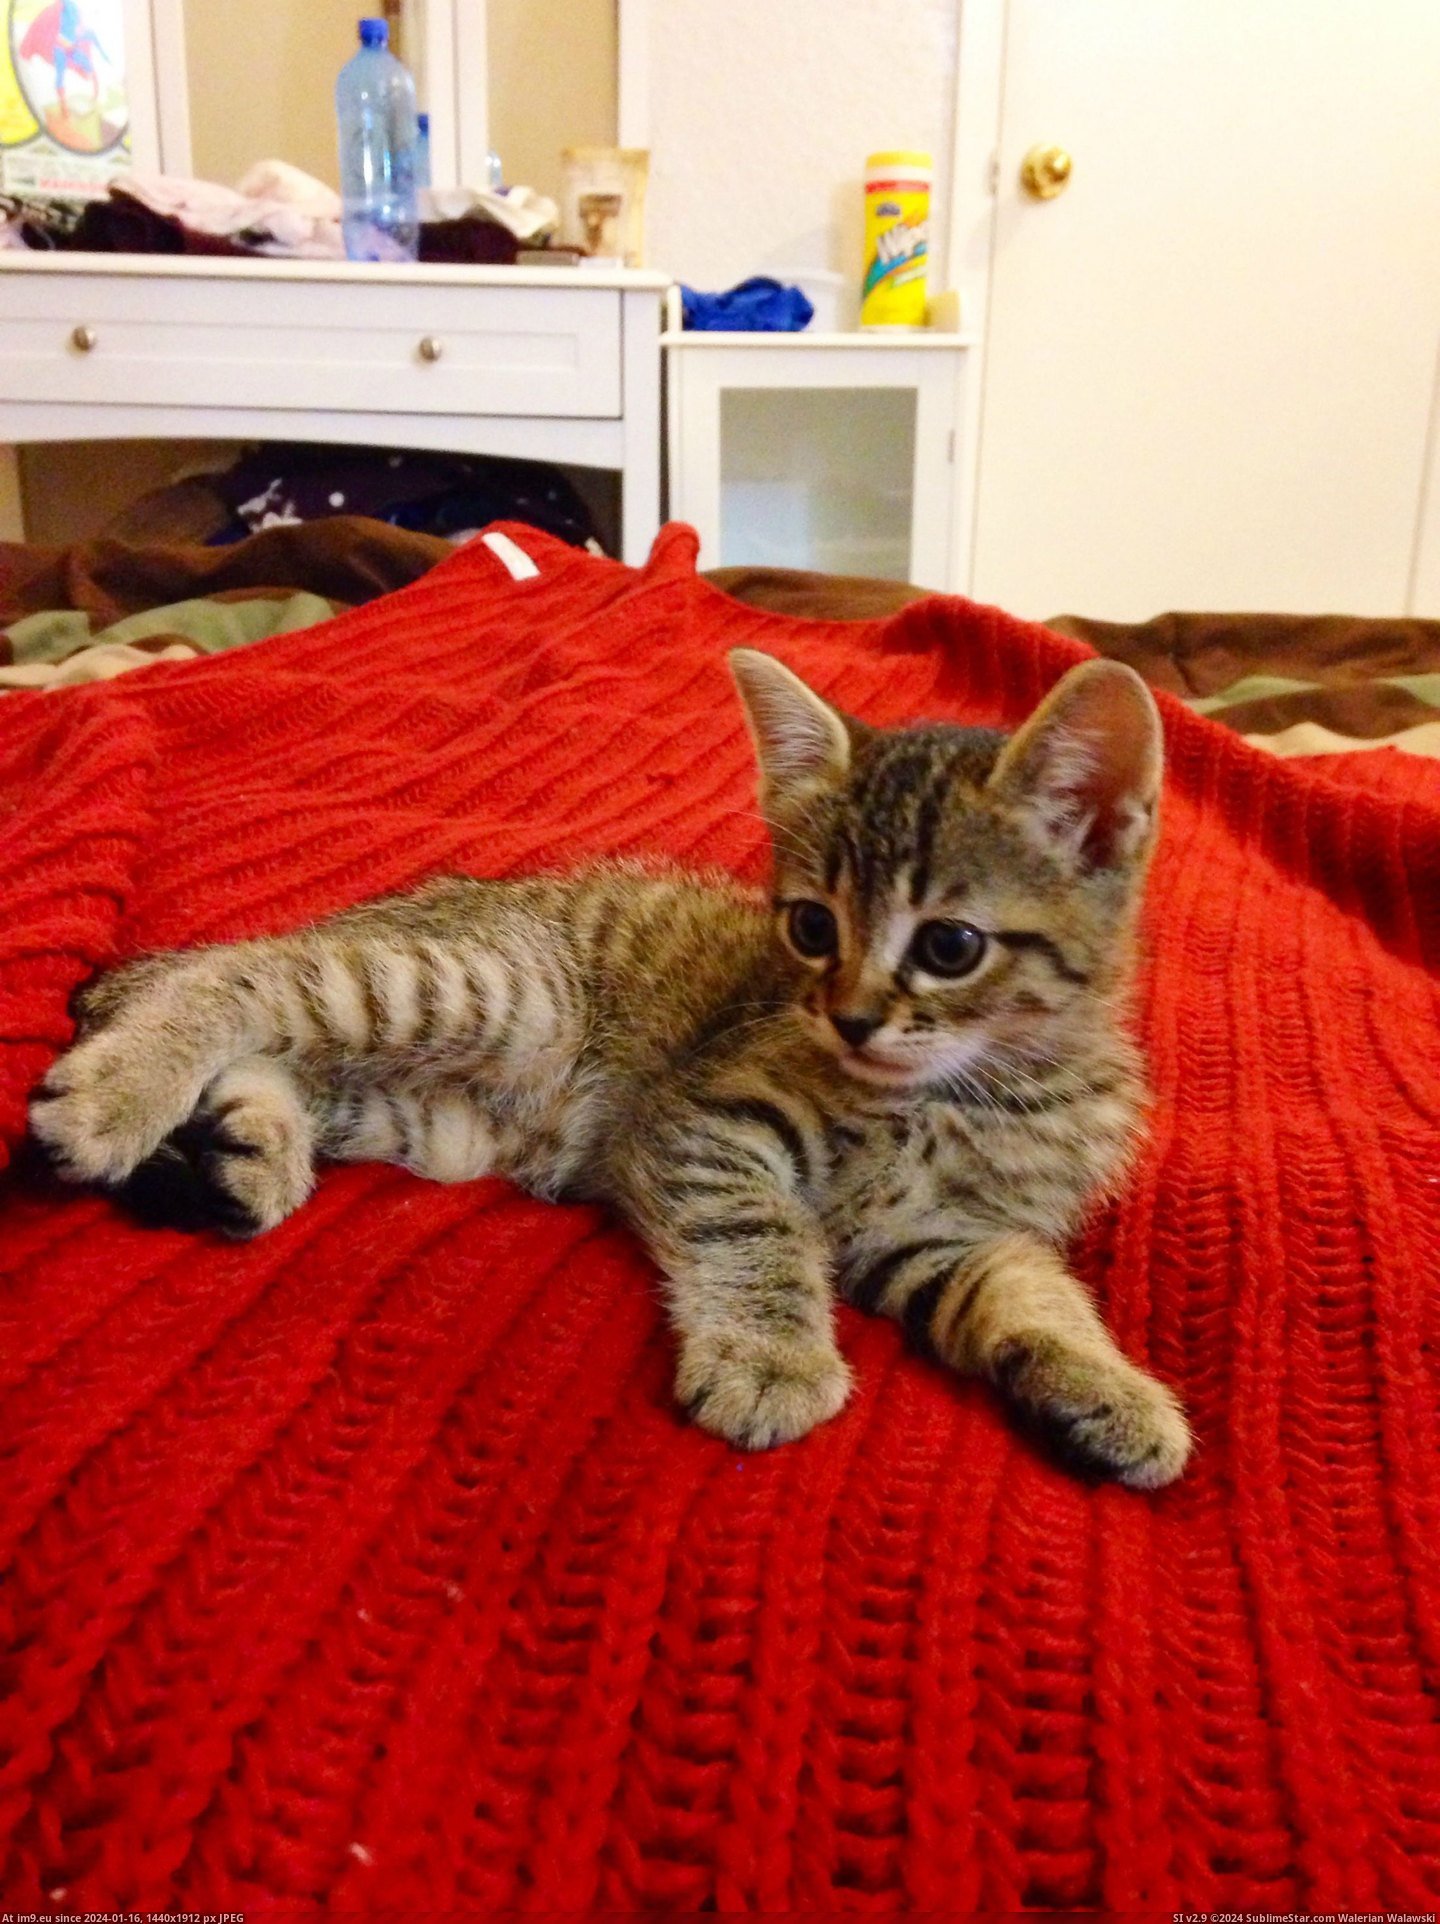 #Cats #New #Kitten #Too #Figured #Belonged #Jester #Meet #Our #Posted [Cats] Posted this in r-aww, figured it belonged here too. Meet our new kitten, Jester! 8 Pic. (Image of album My r/CATS favs))